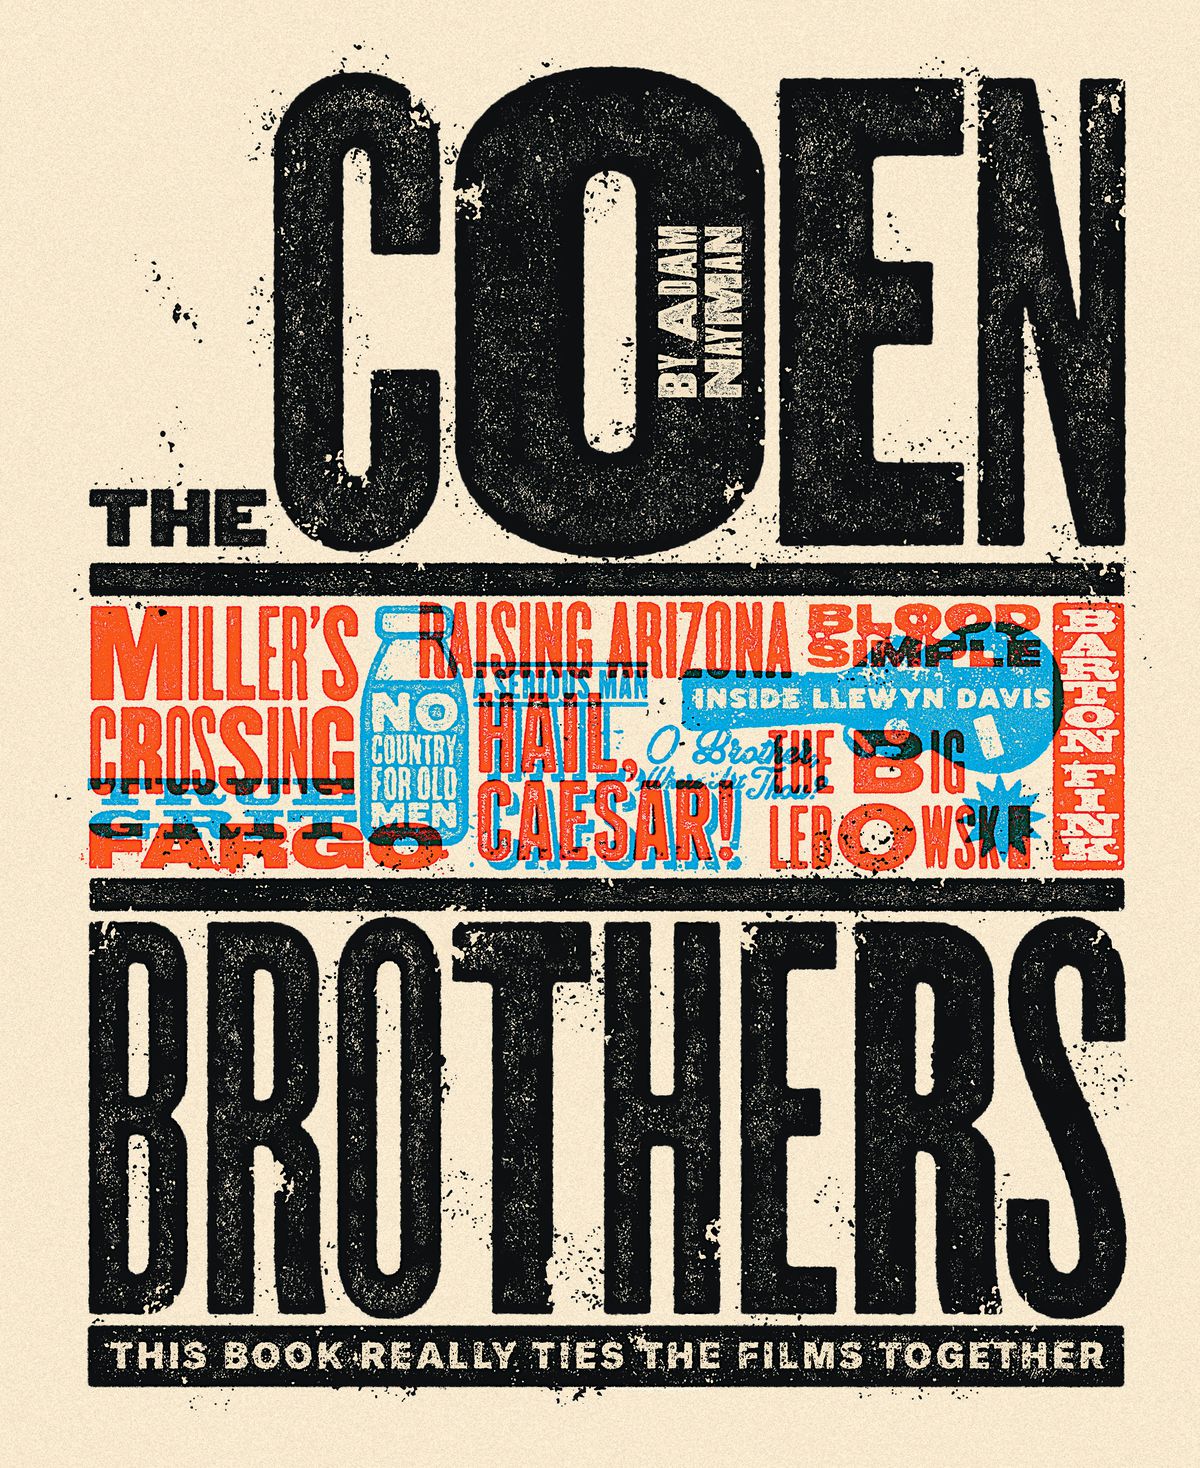 The book cover of “The Coen Brothers: This Book Really Ties the Films Together” by Adam Nayman